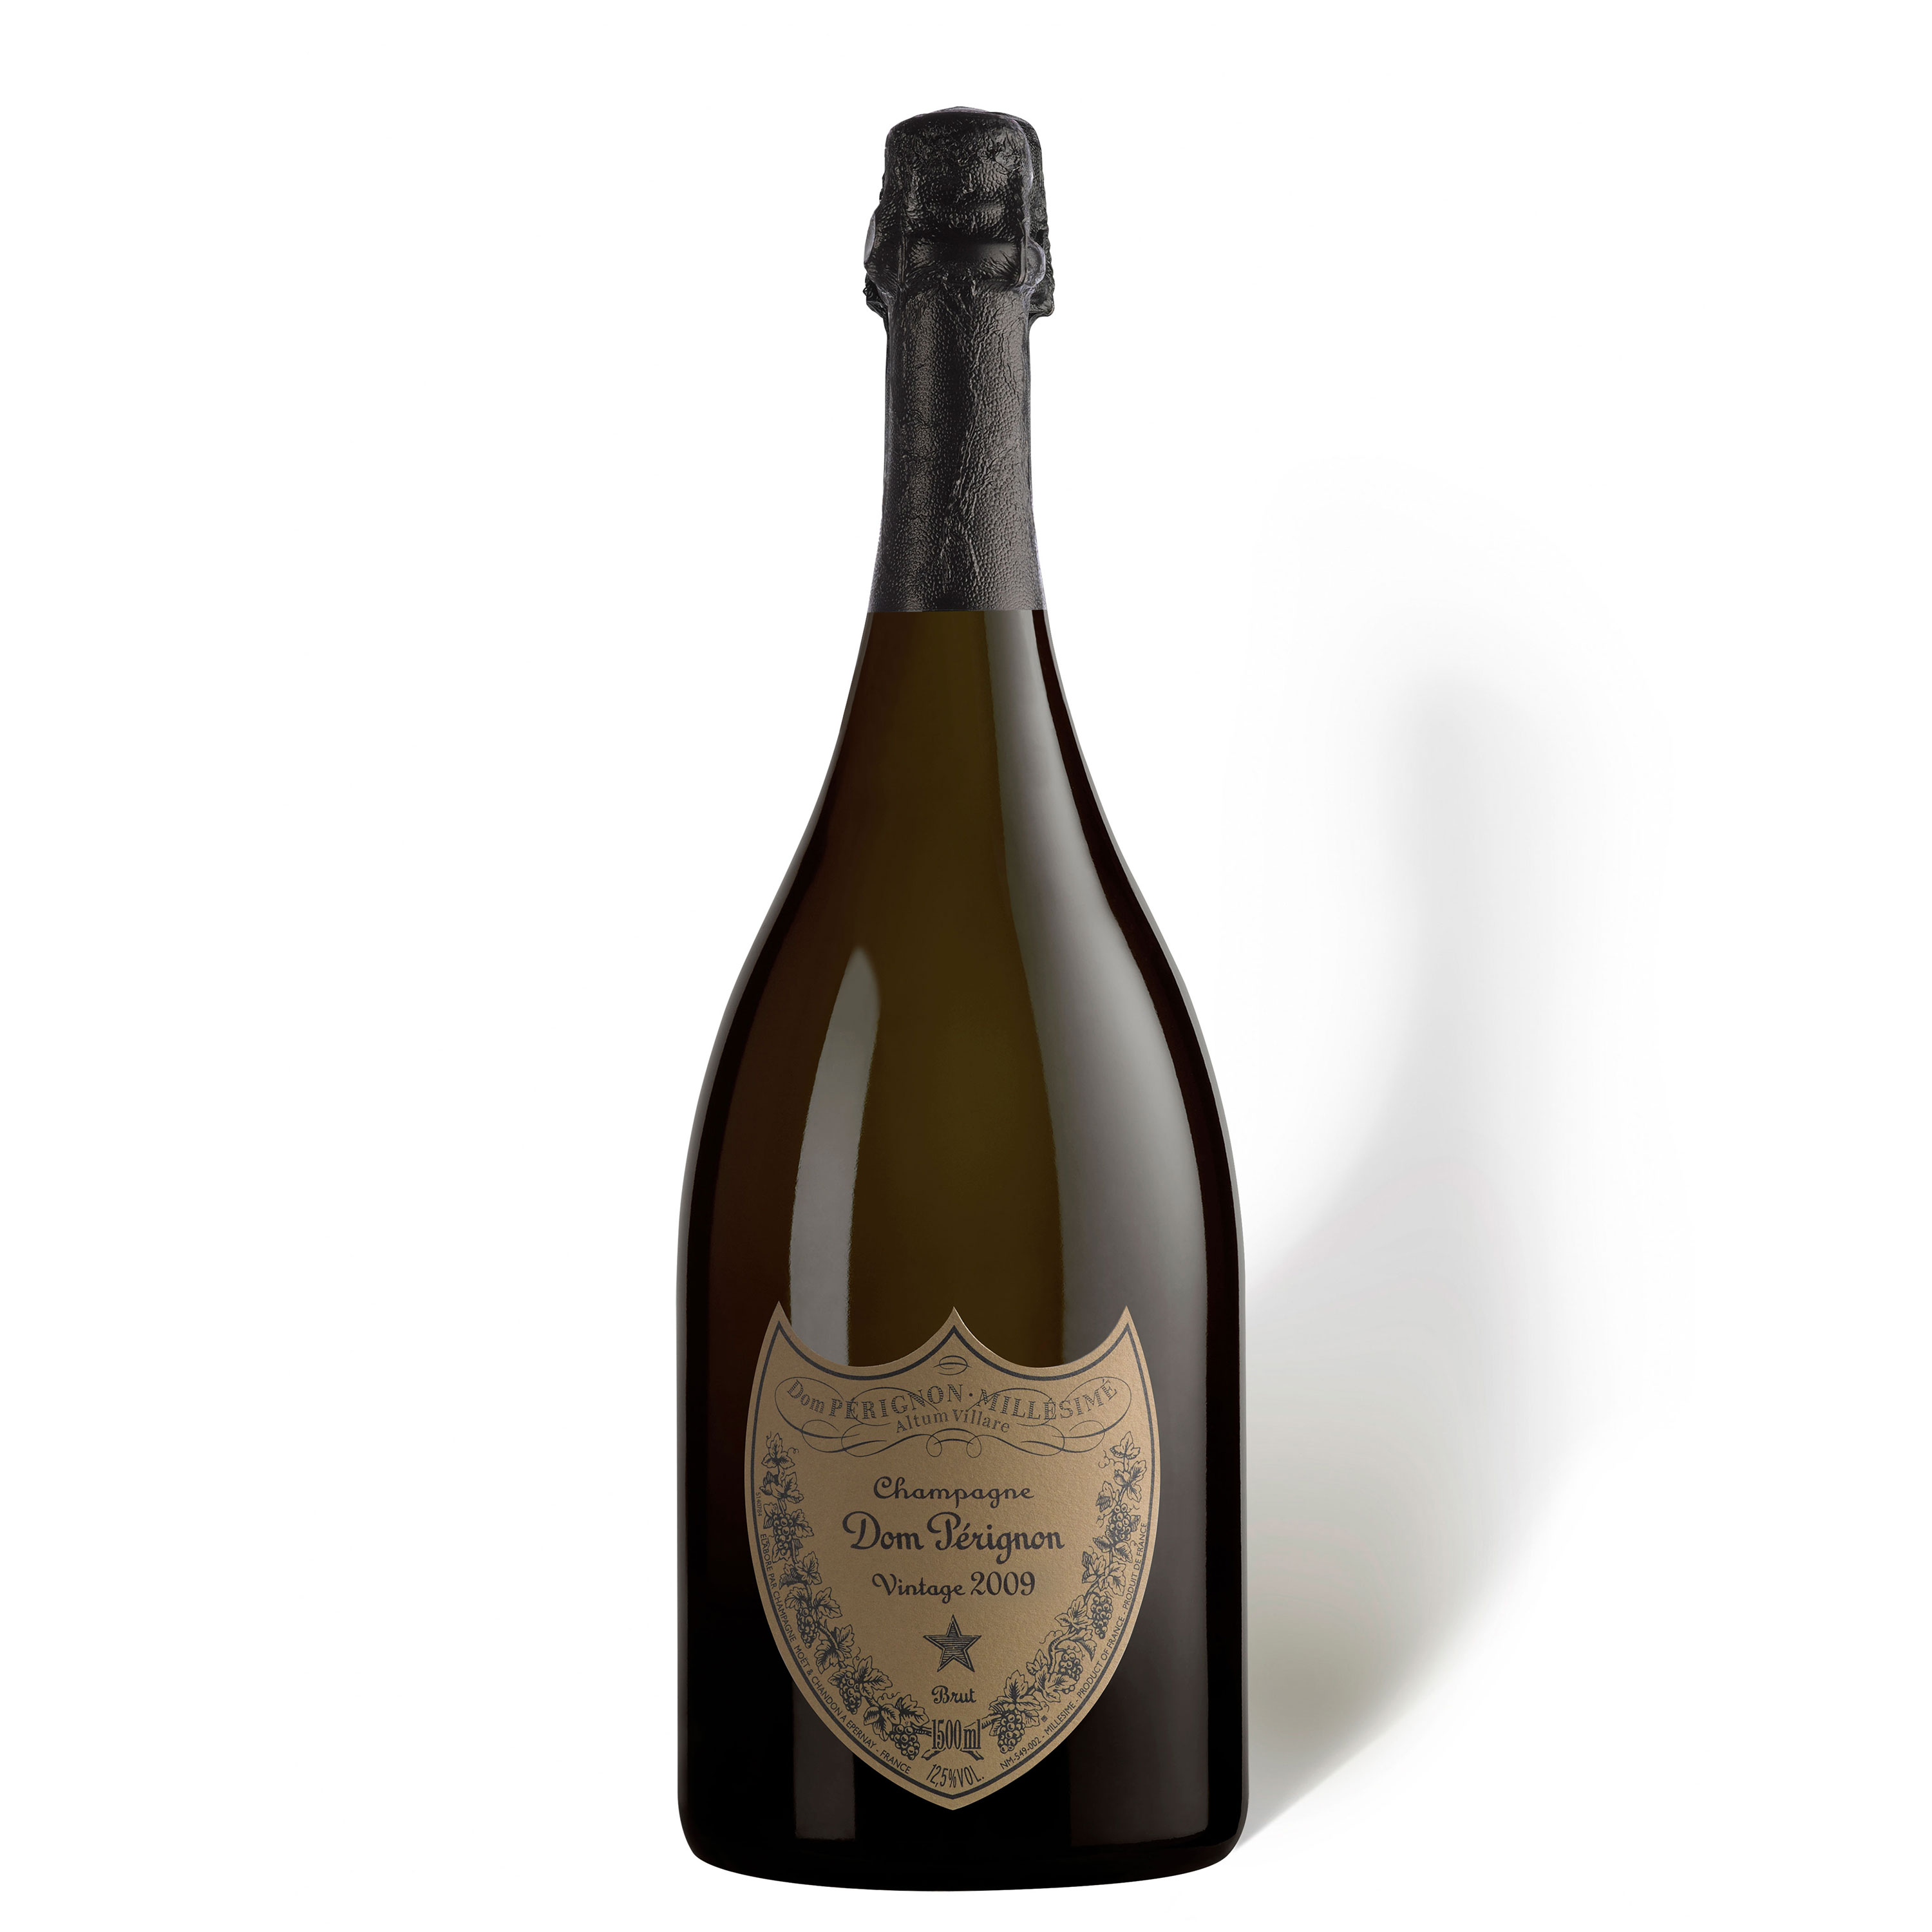 Buy And Send Magnum of Dom Perignon Brut, 2009, Champagne, Gift Boxed Gift Online